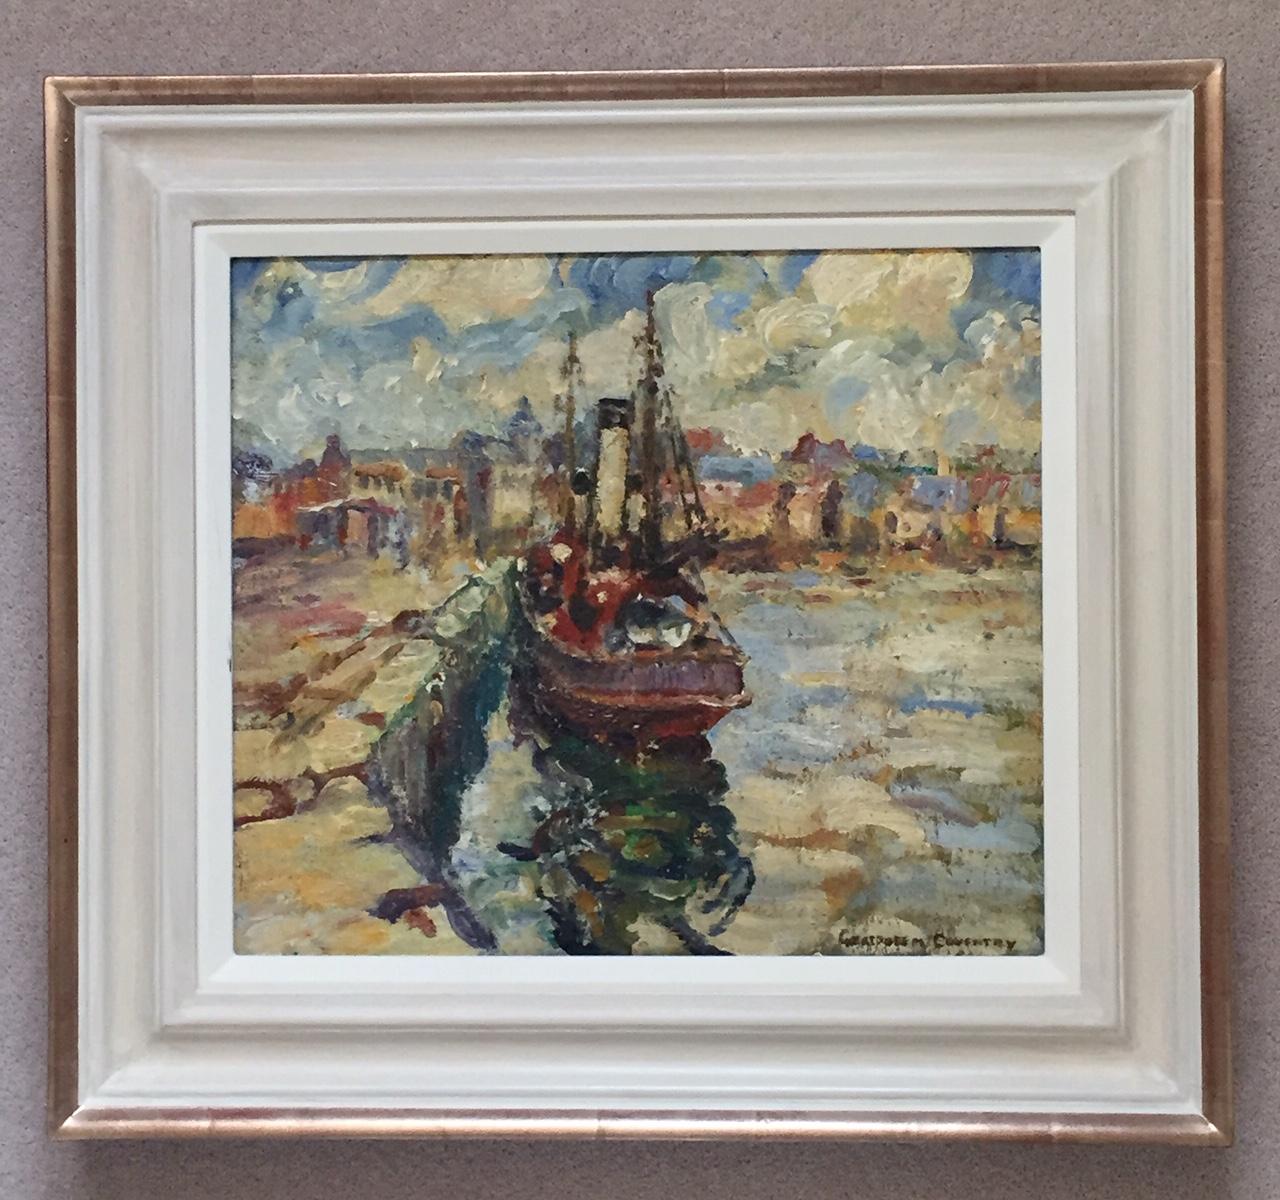 Steam Drifter, oil on canvas, Marine, Scottish colourist style, Gertrude Coventry (Impressionismus), Painting, von Gertrude Mary Coventry